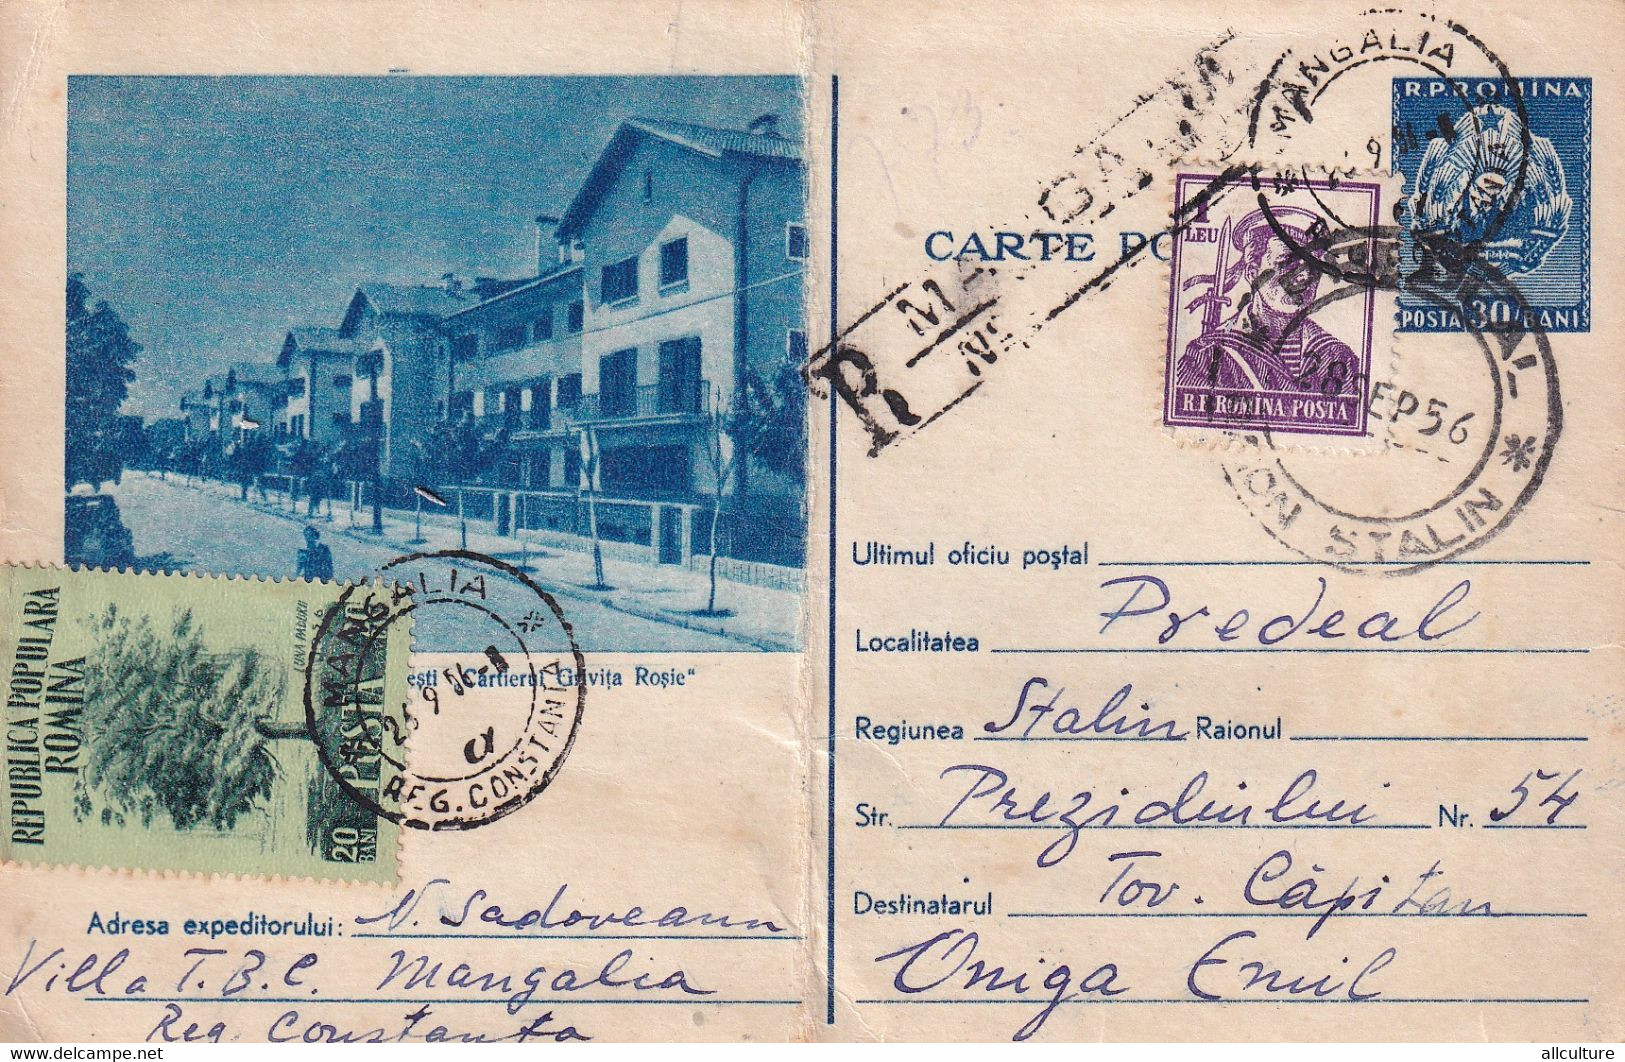 A7938- ROMANIAN PEOPLE'S REPUBLIC, REGISTRED LETTER, MANGALIA 1956 STAMPED STATIONERY - Ganzsachen